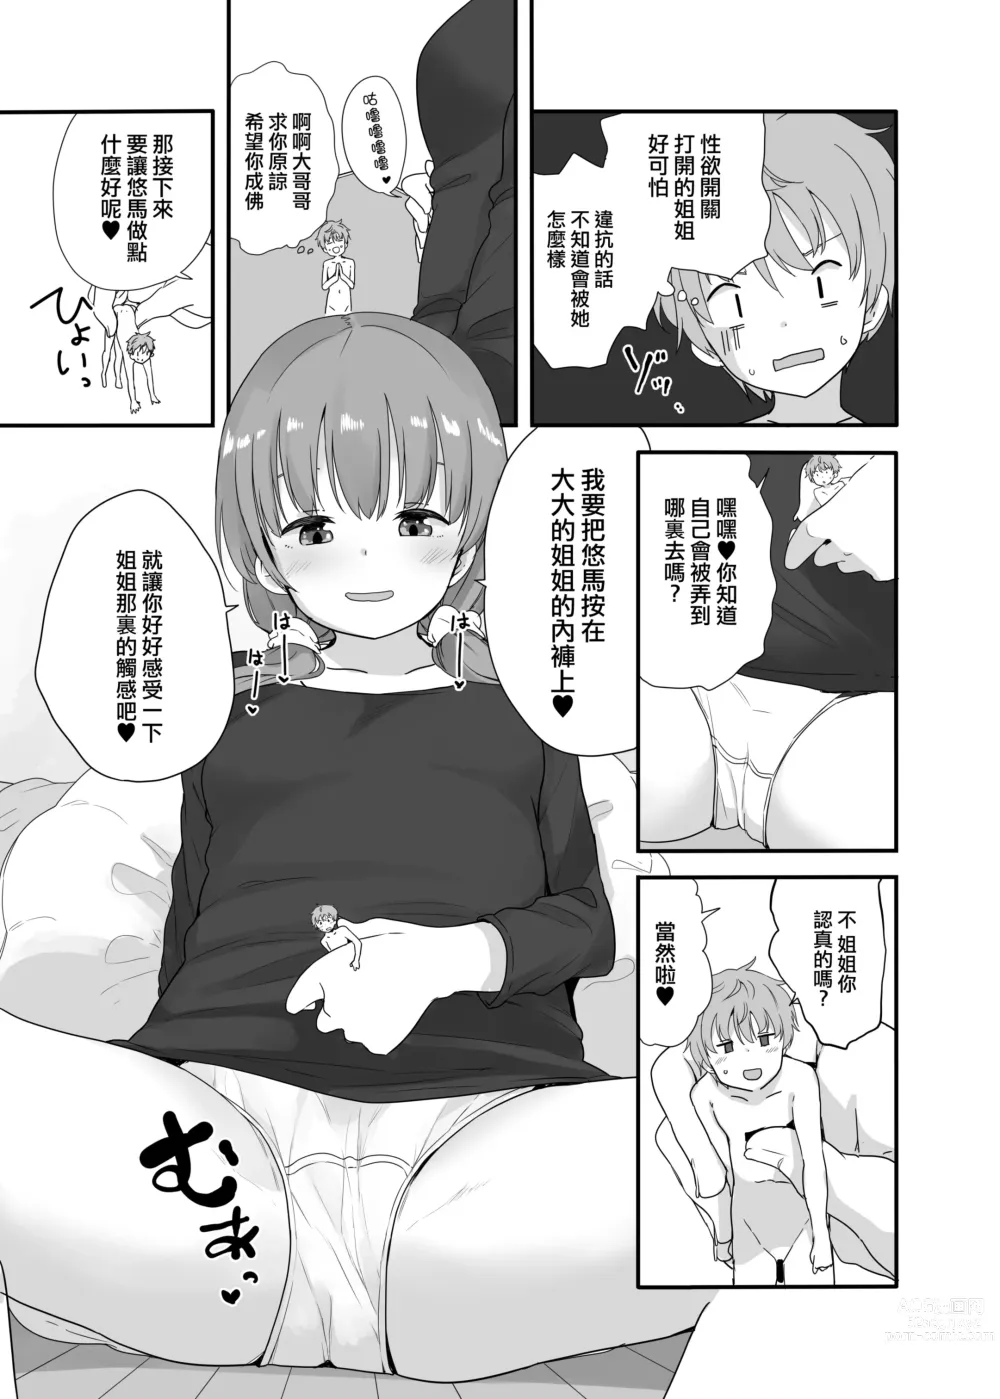 Page 10 of doujinshi Little Sister With Grande Everyday 3